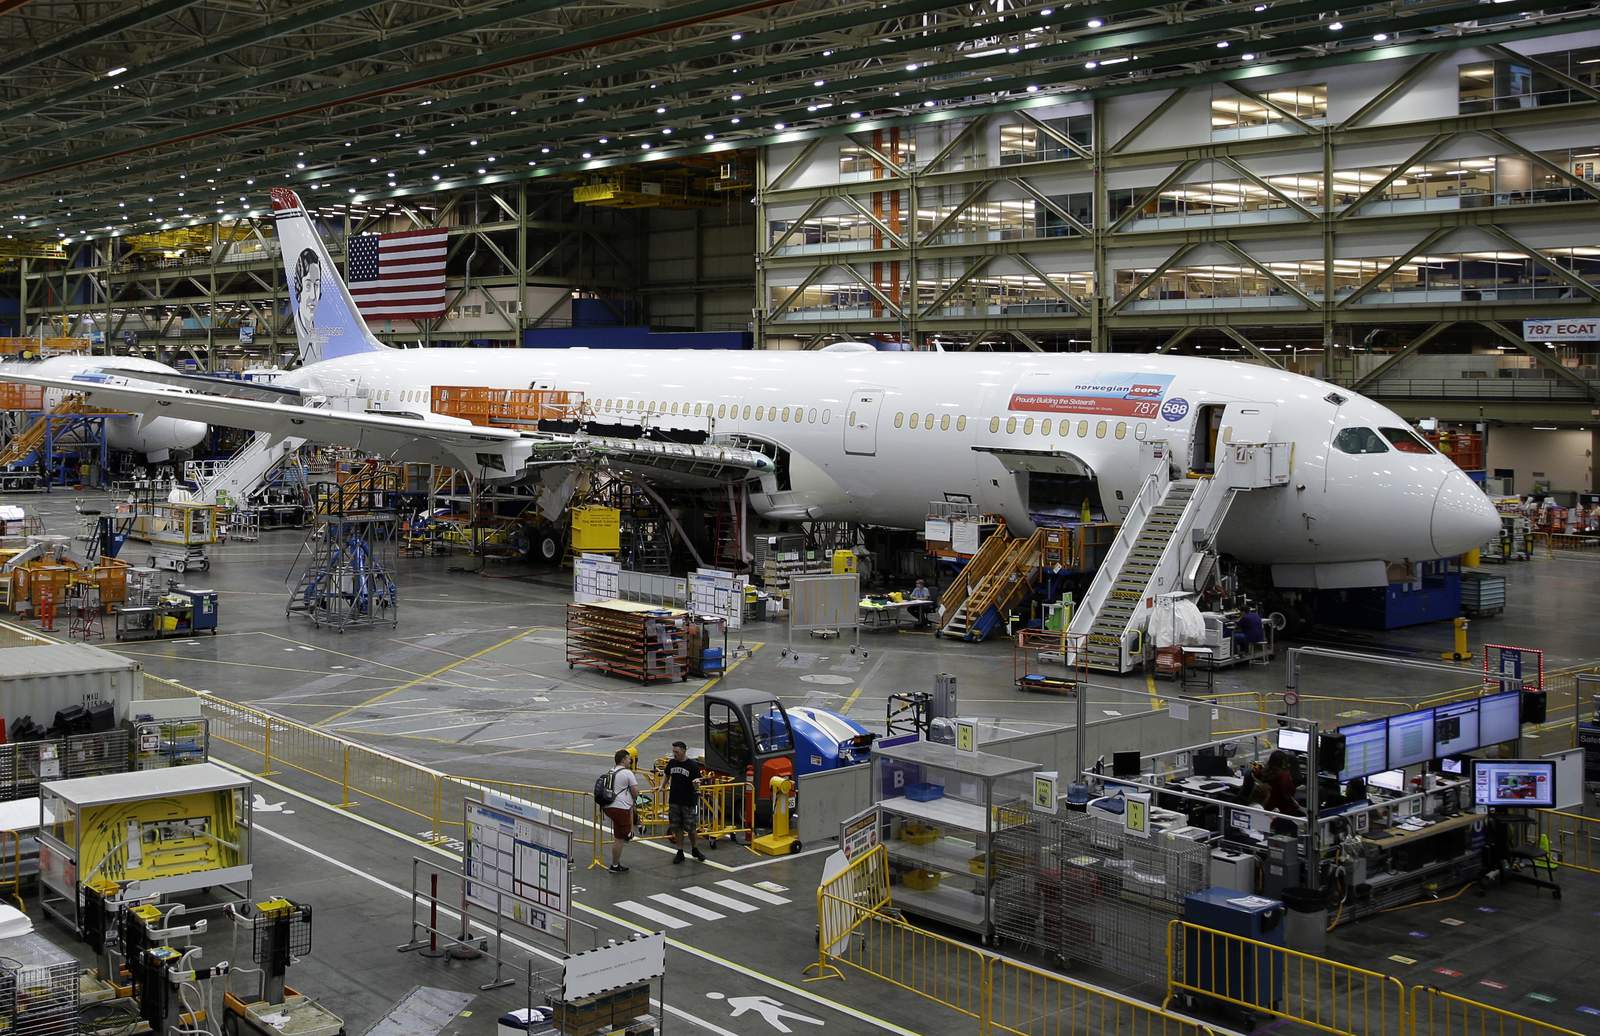 Boeing finds new problem with 787 that will delay deliveries